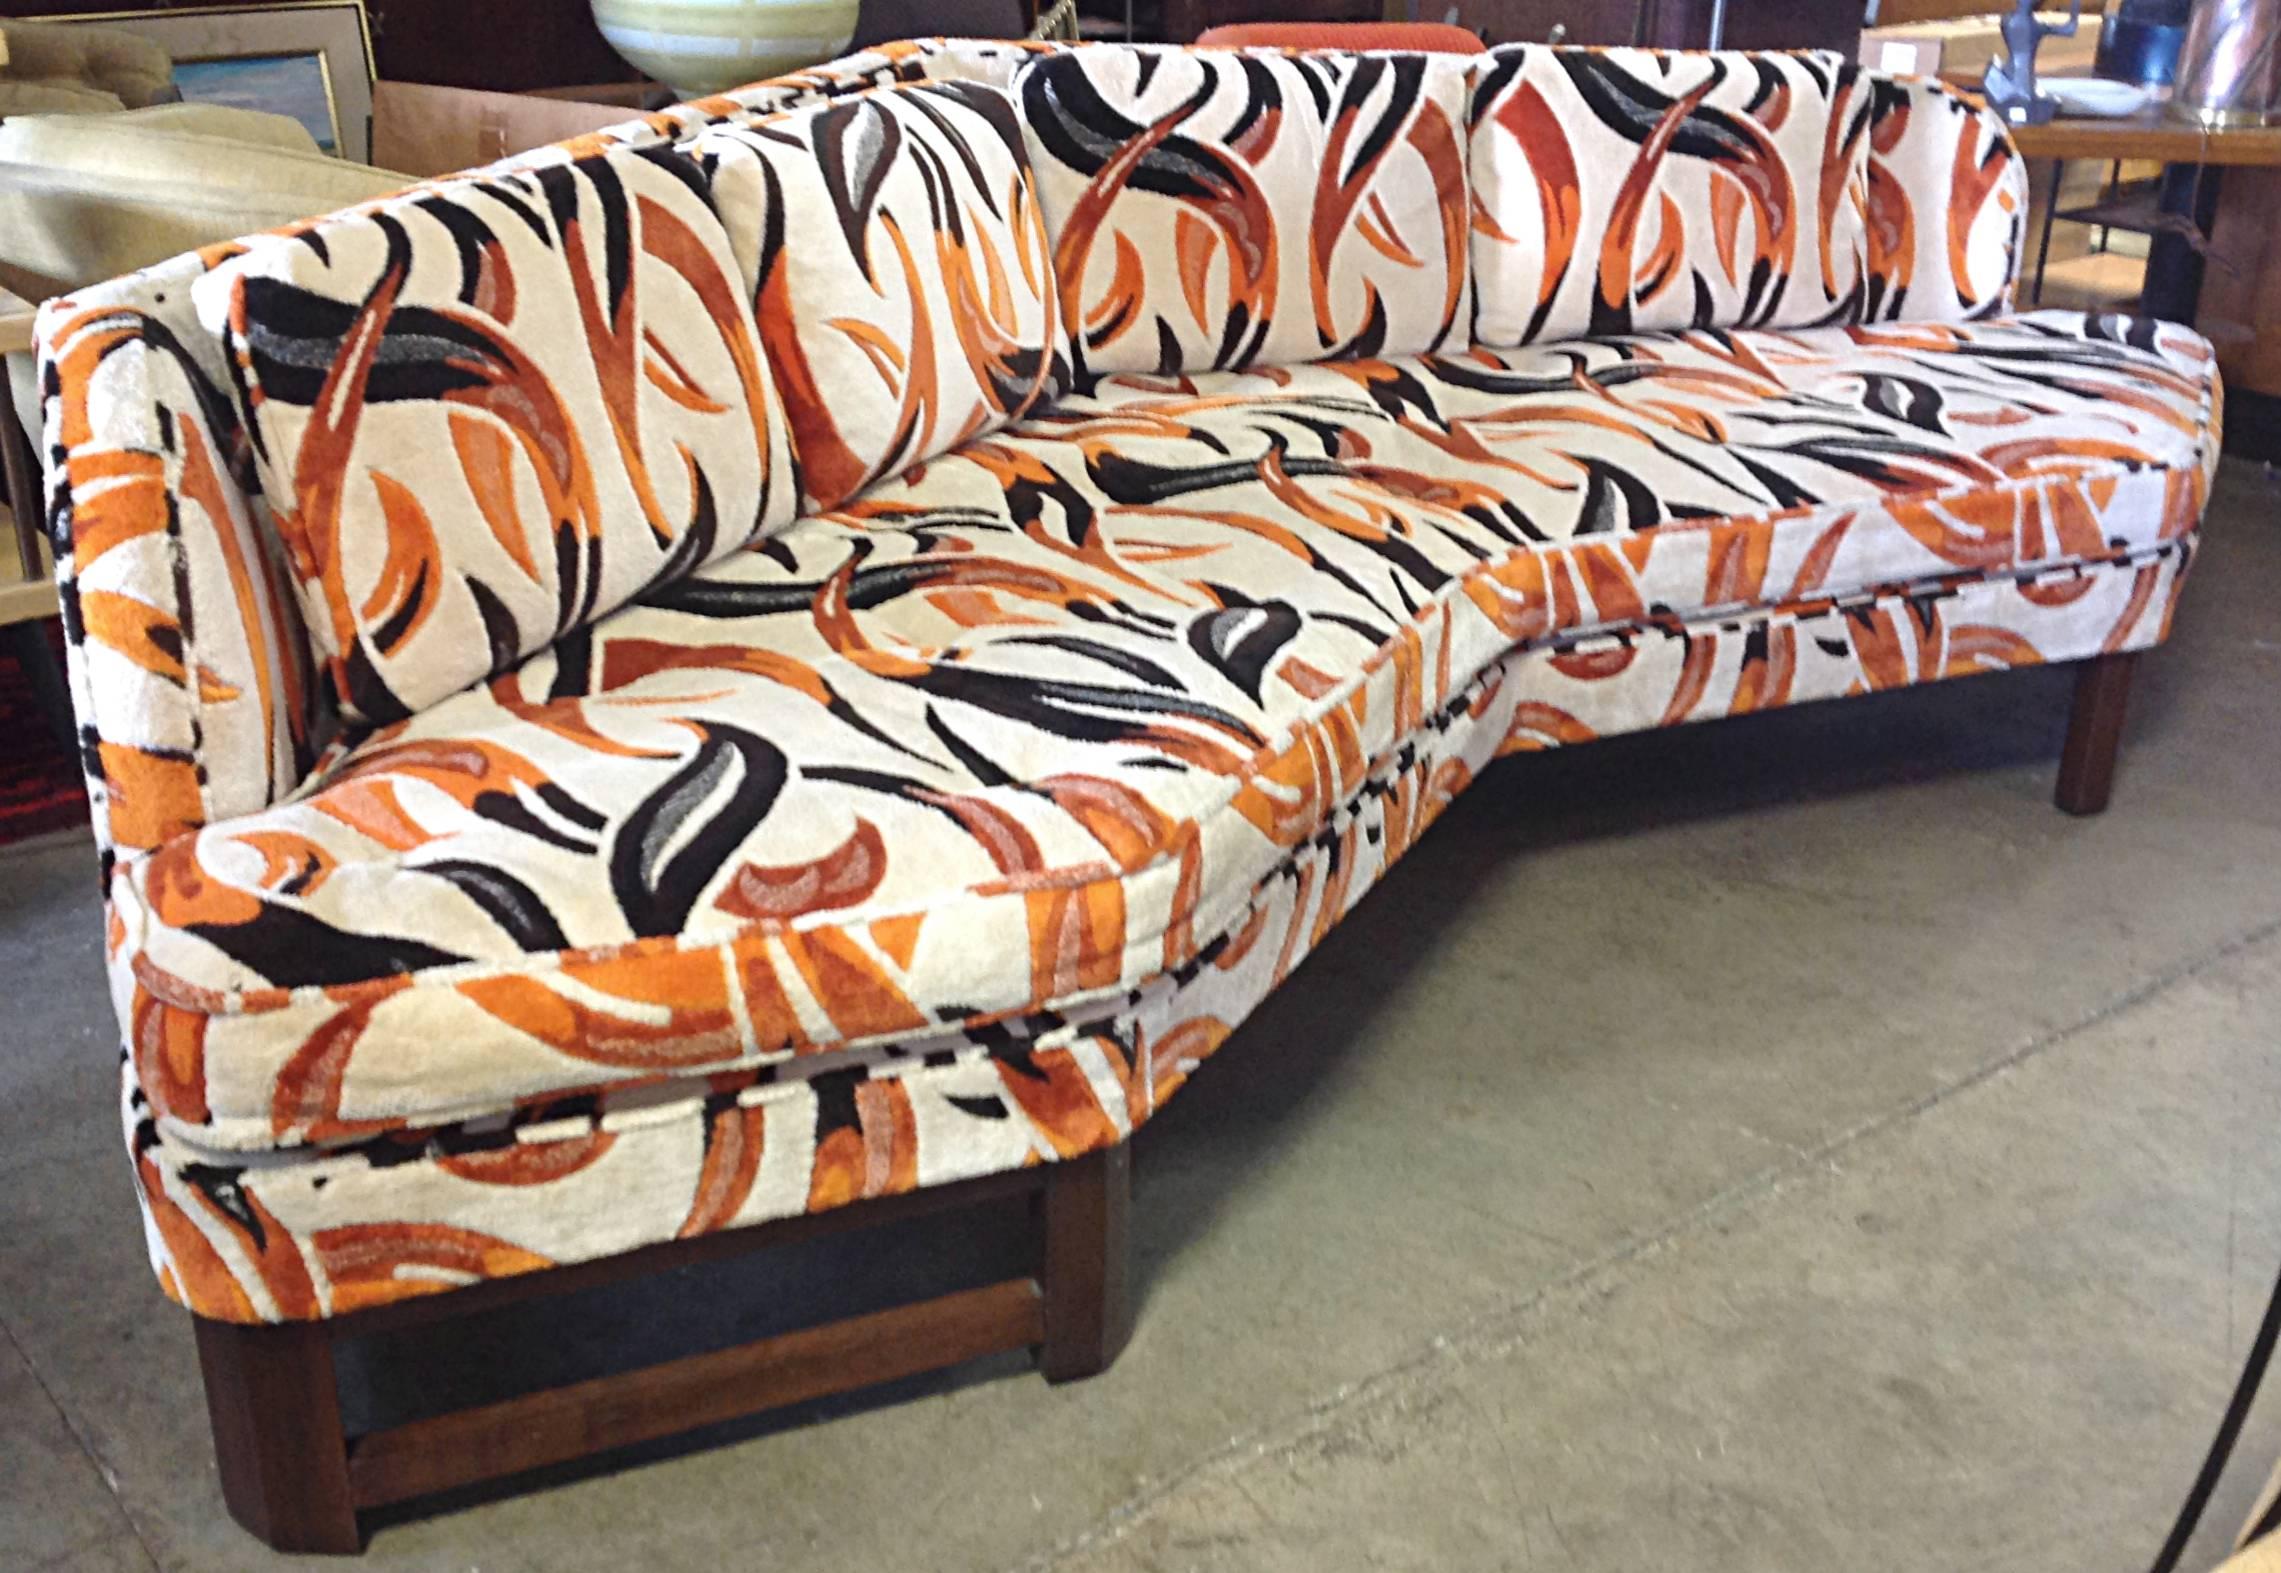 Two angled sofas reminiscent of Wormley's Janus collection pieces. Original plush fabric in graphic 